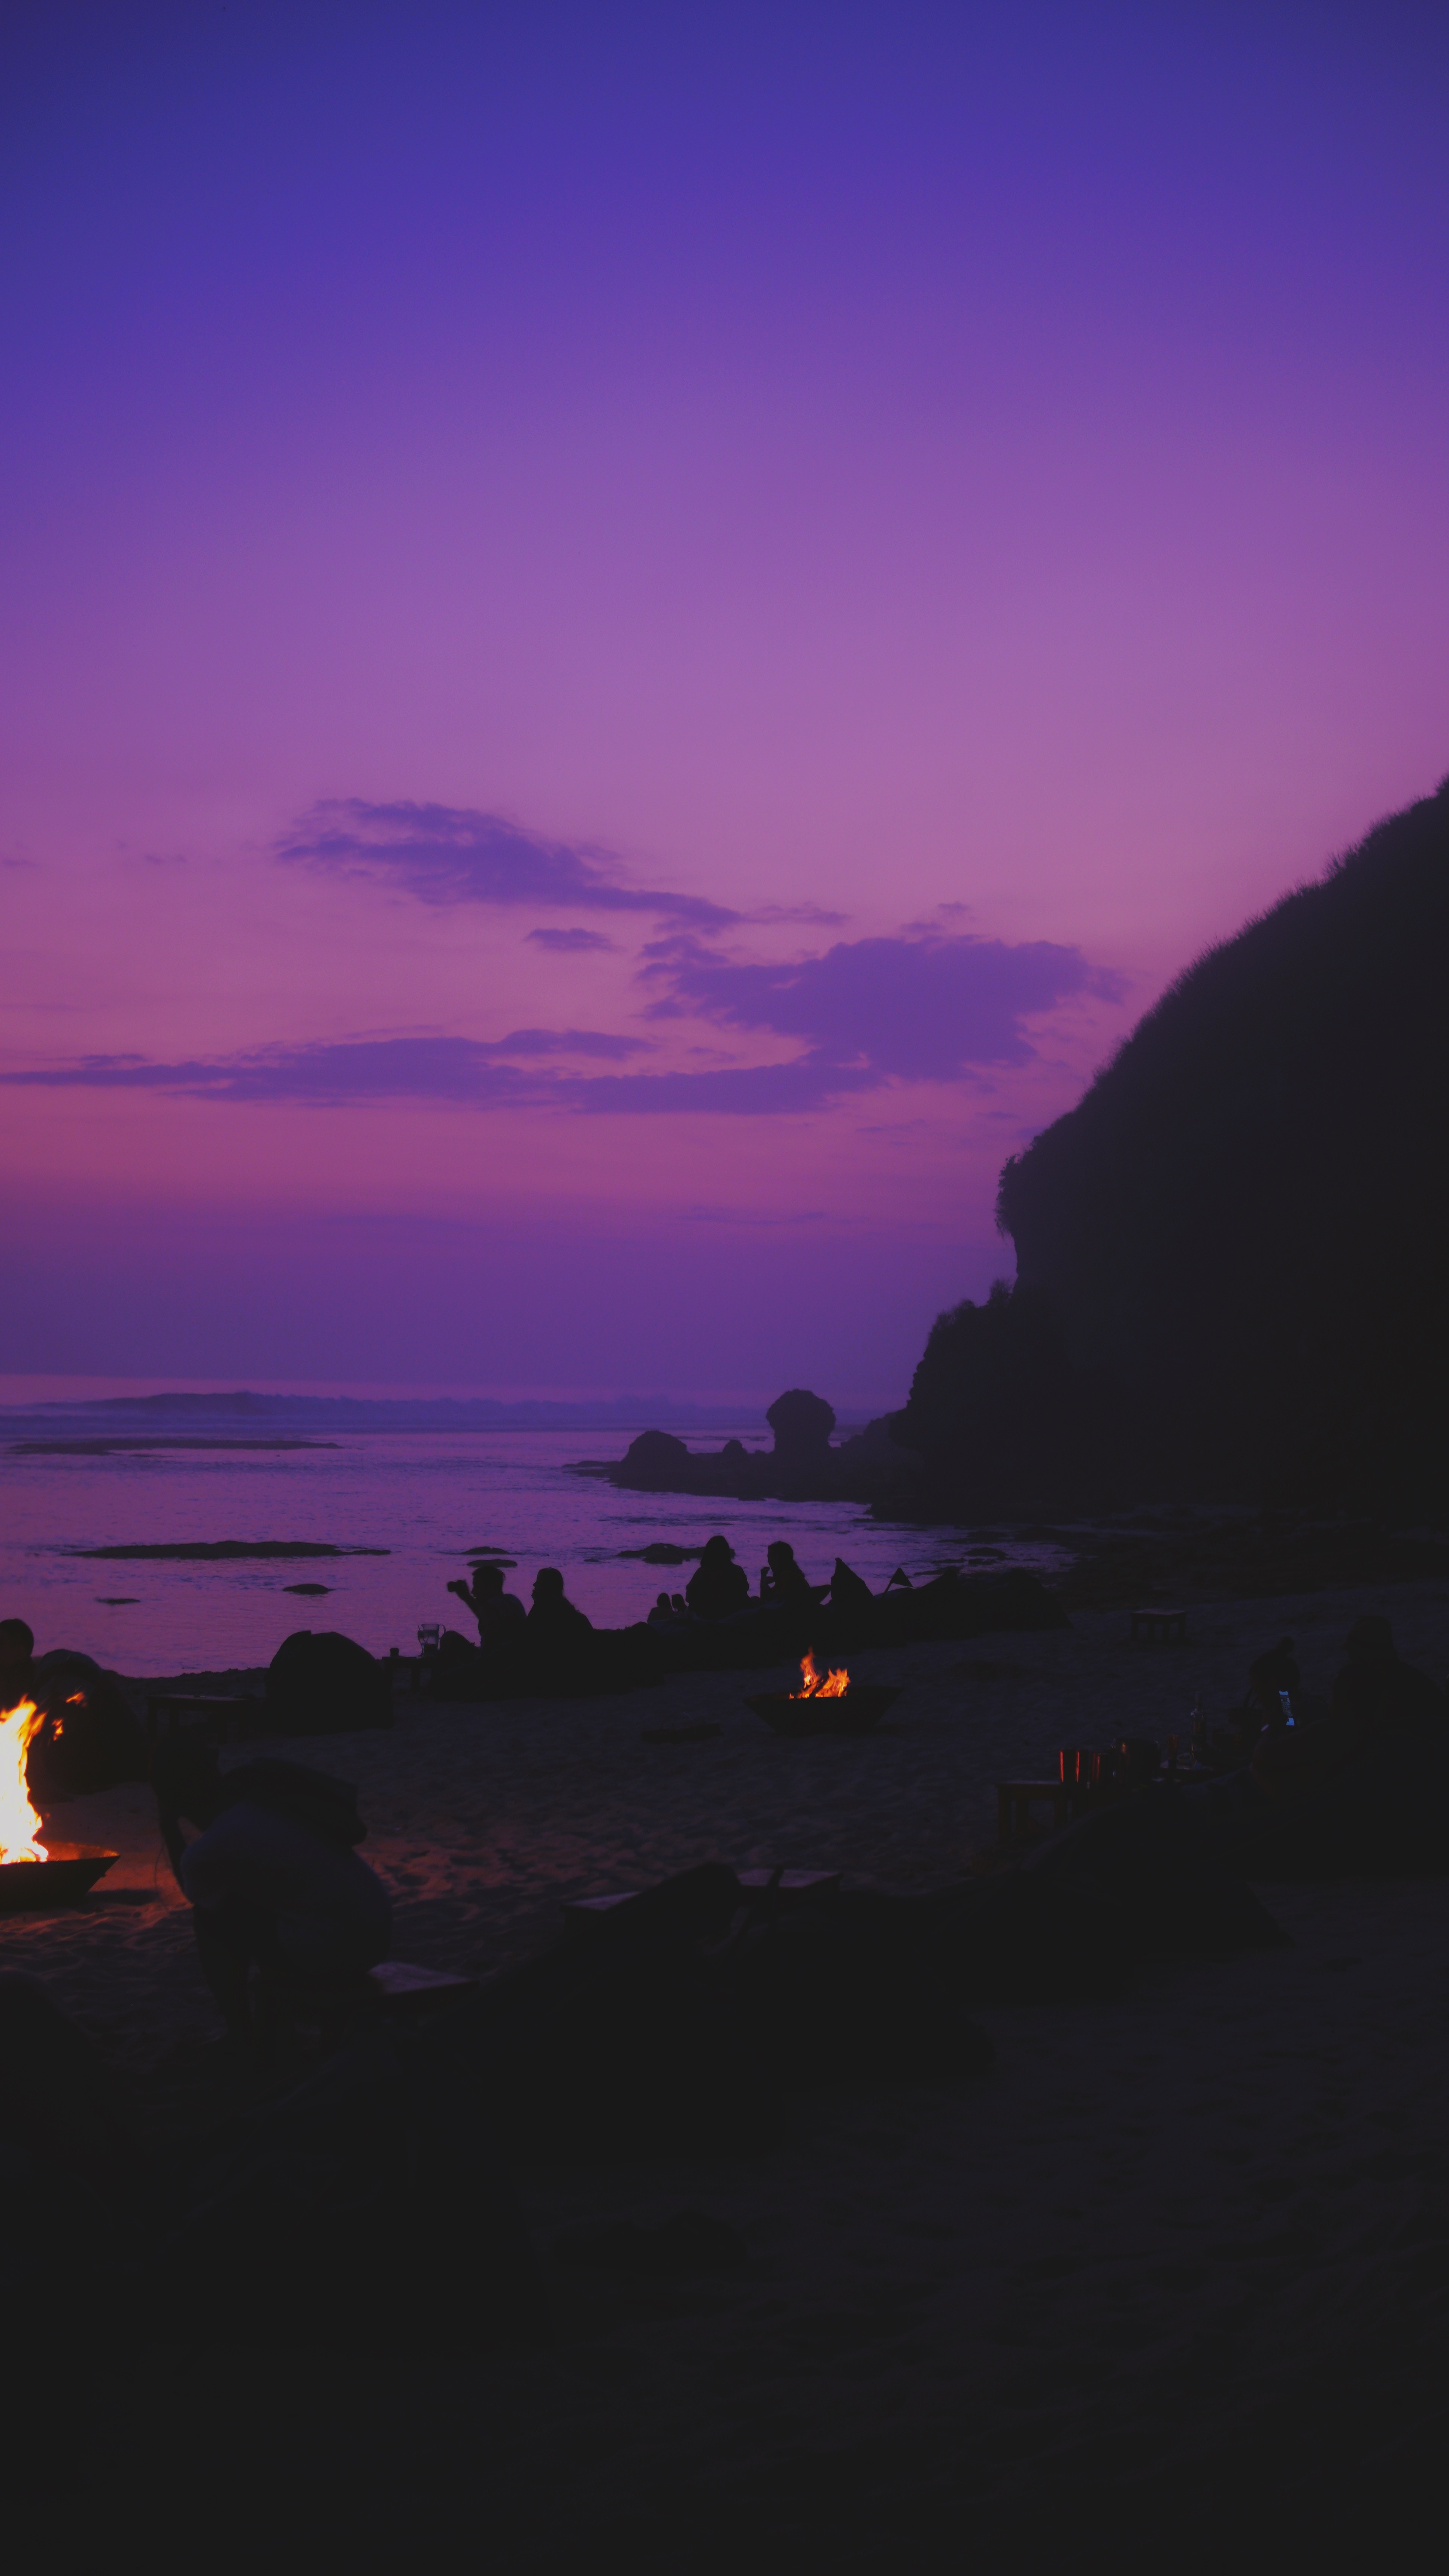 indonesia, dark, sunset, beach, shore, bank, silhouettes, relaxation, rest Phone Background